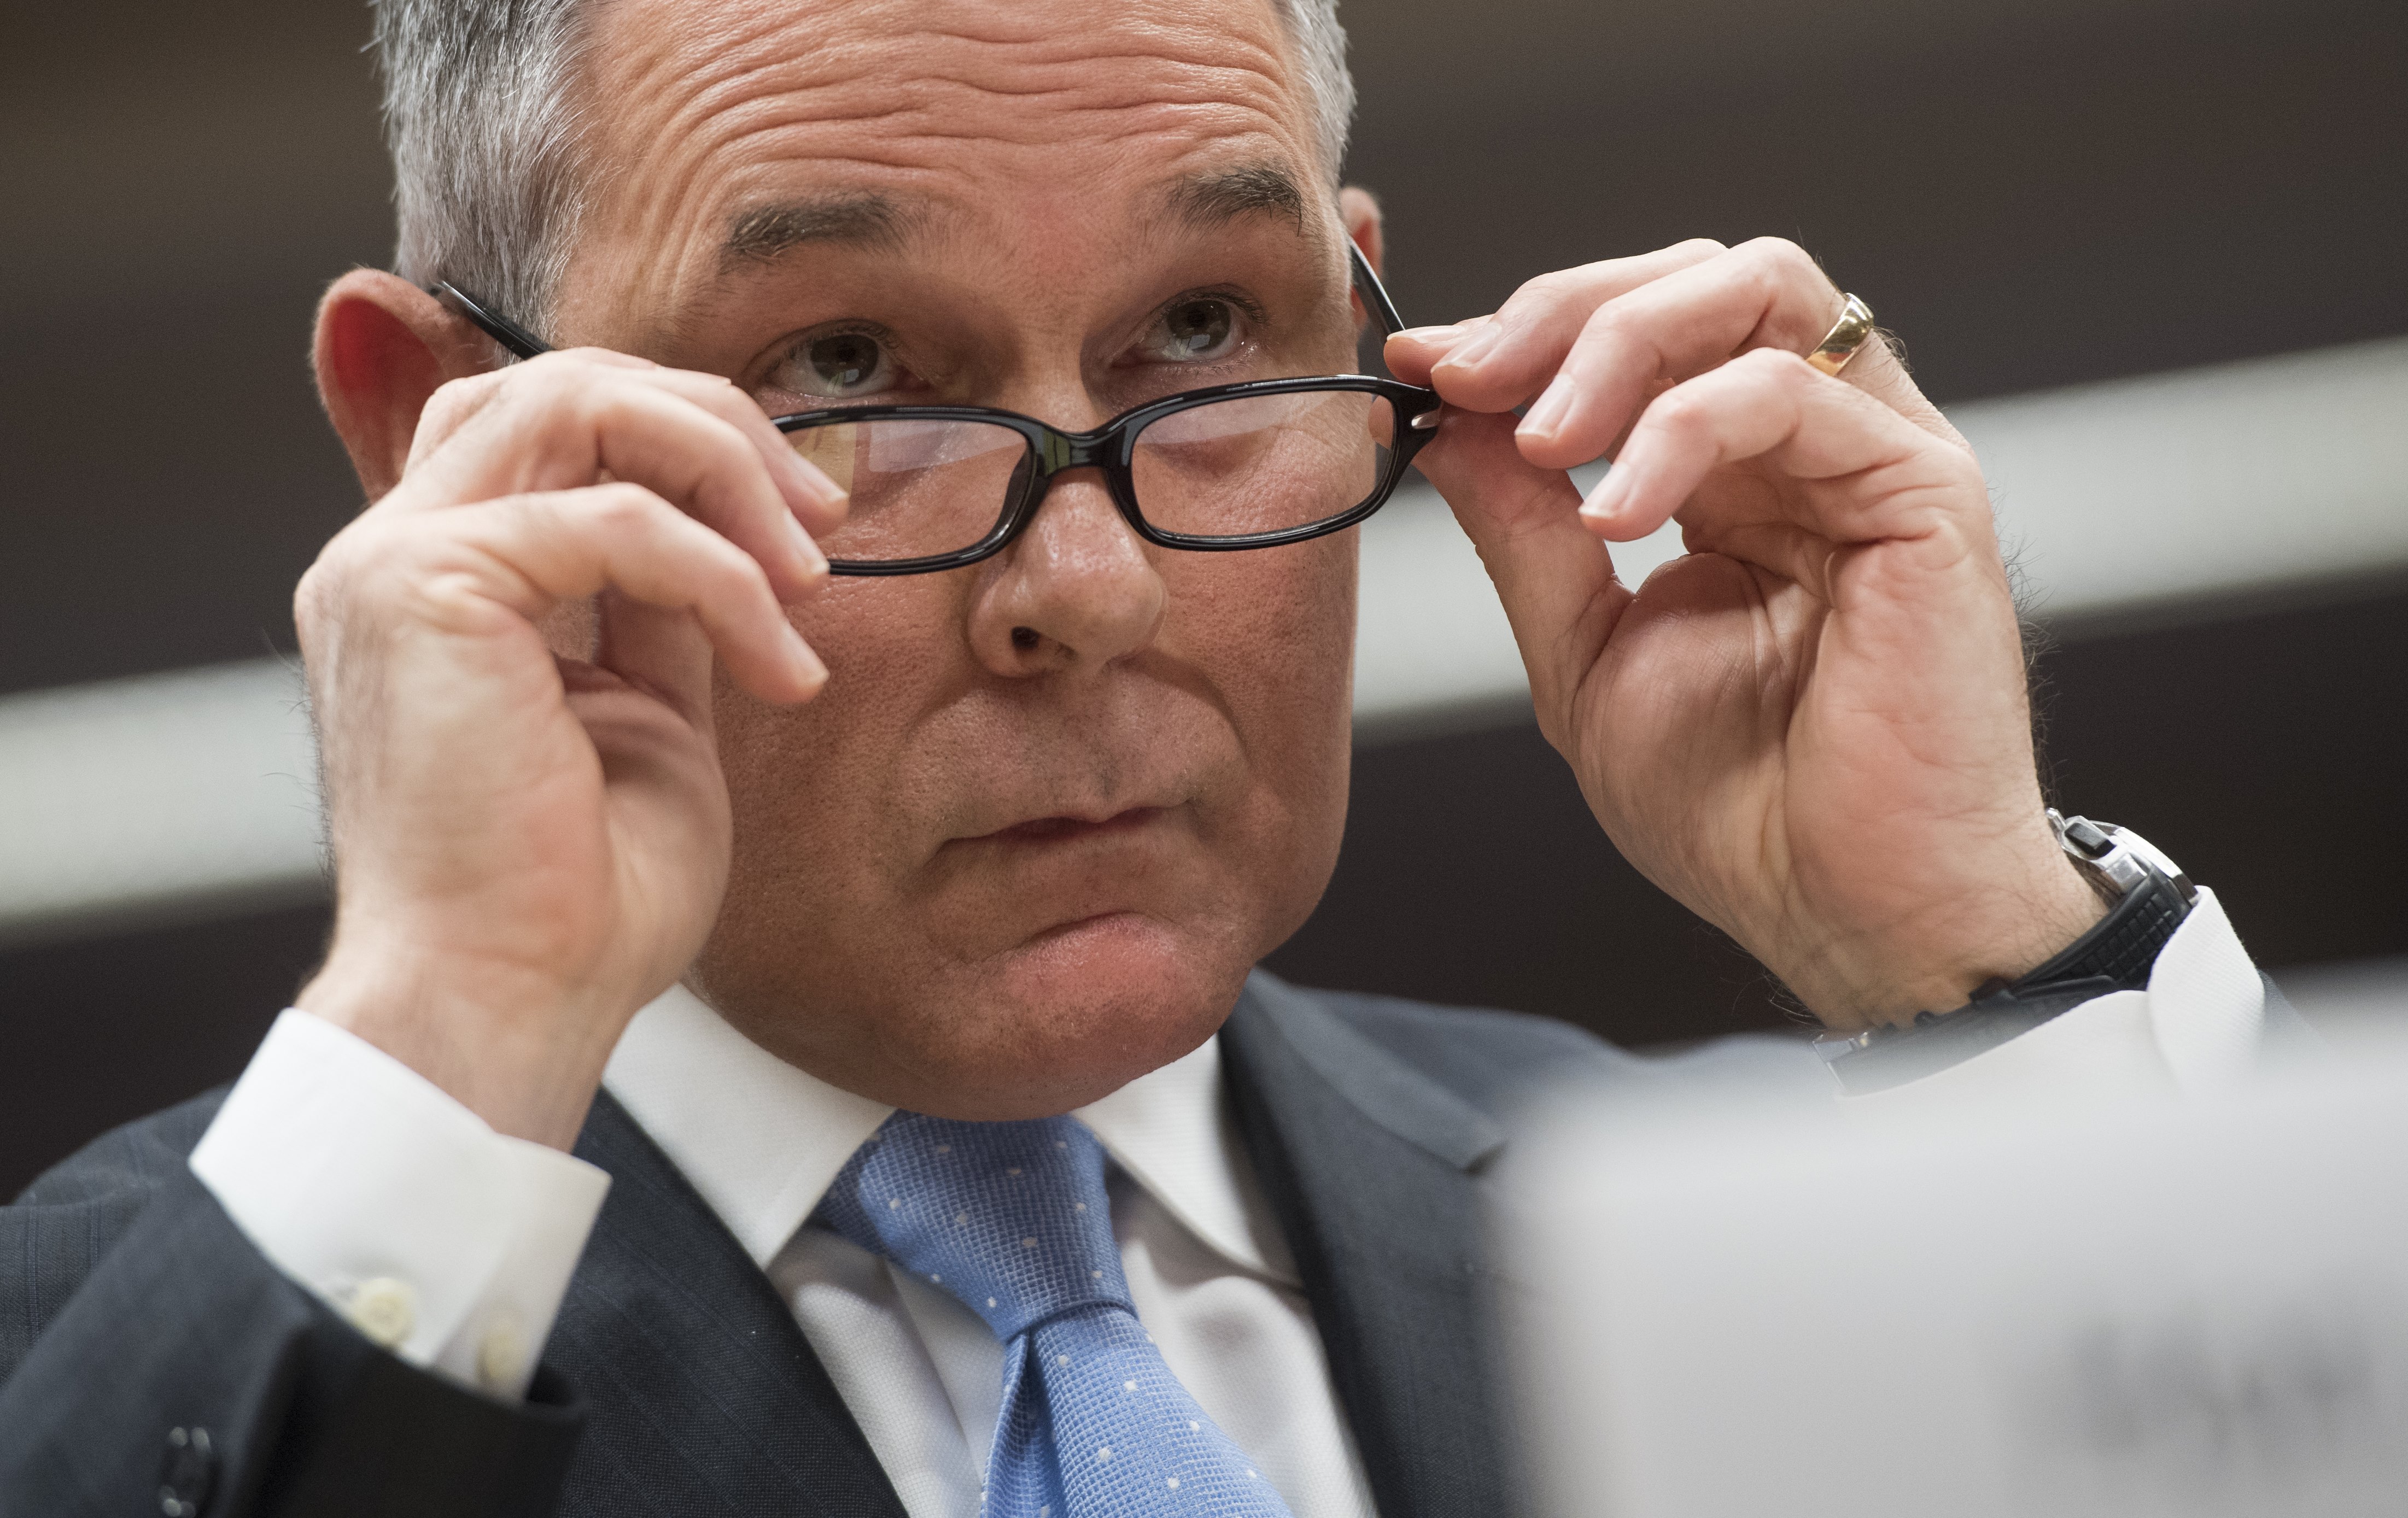 EPA Administrator Scott Pruitt testifies about the fiscal year 2018 budget in Washington, DC, on June 27, 2017. (Saul Loeb—AFP/Getty Images)